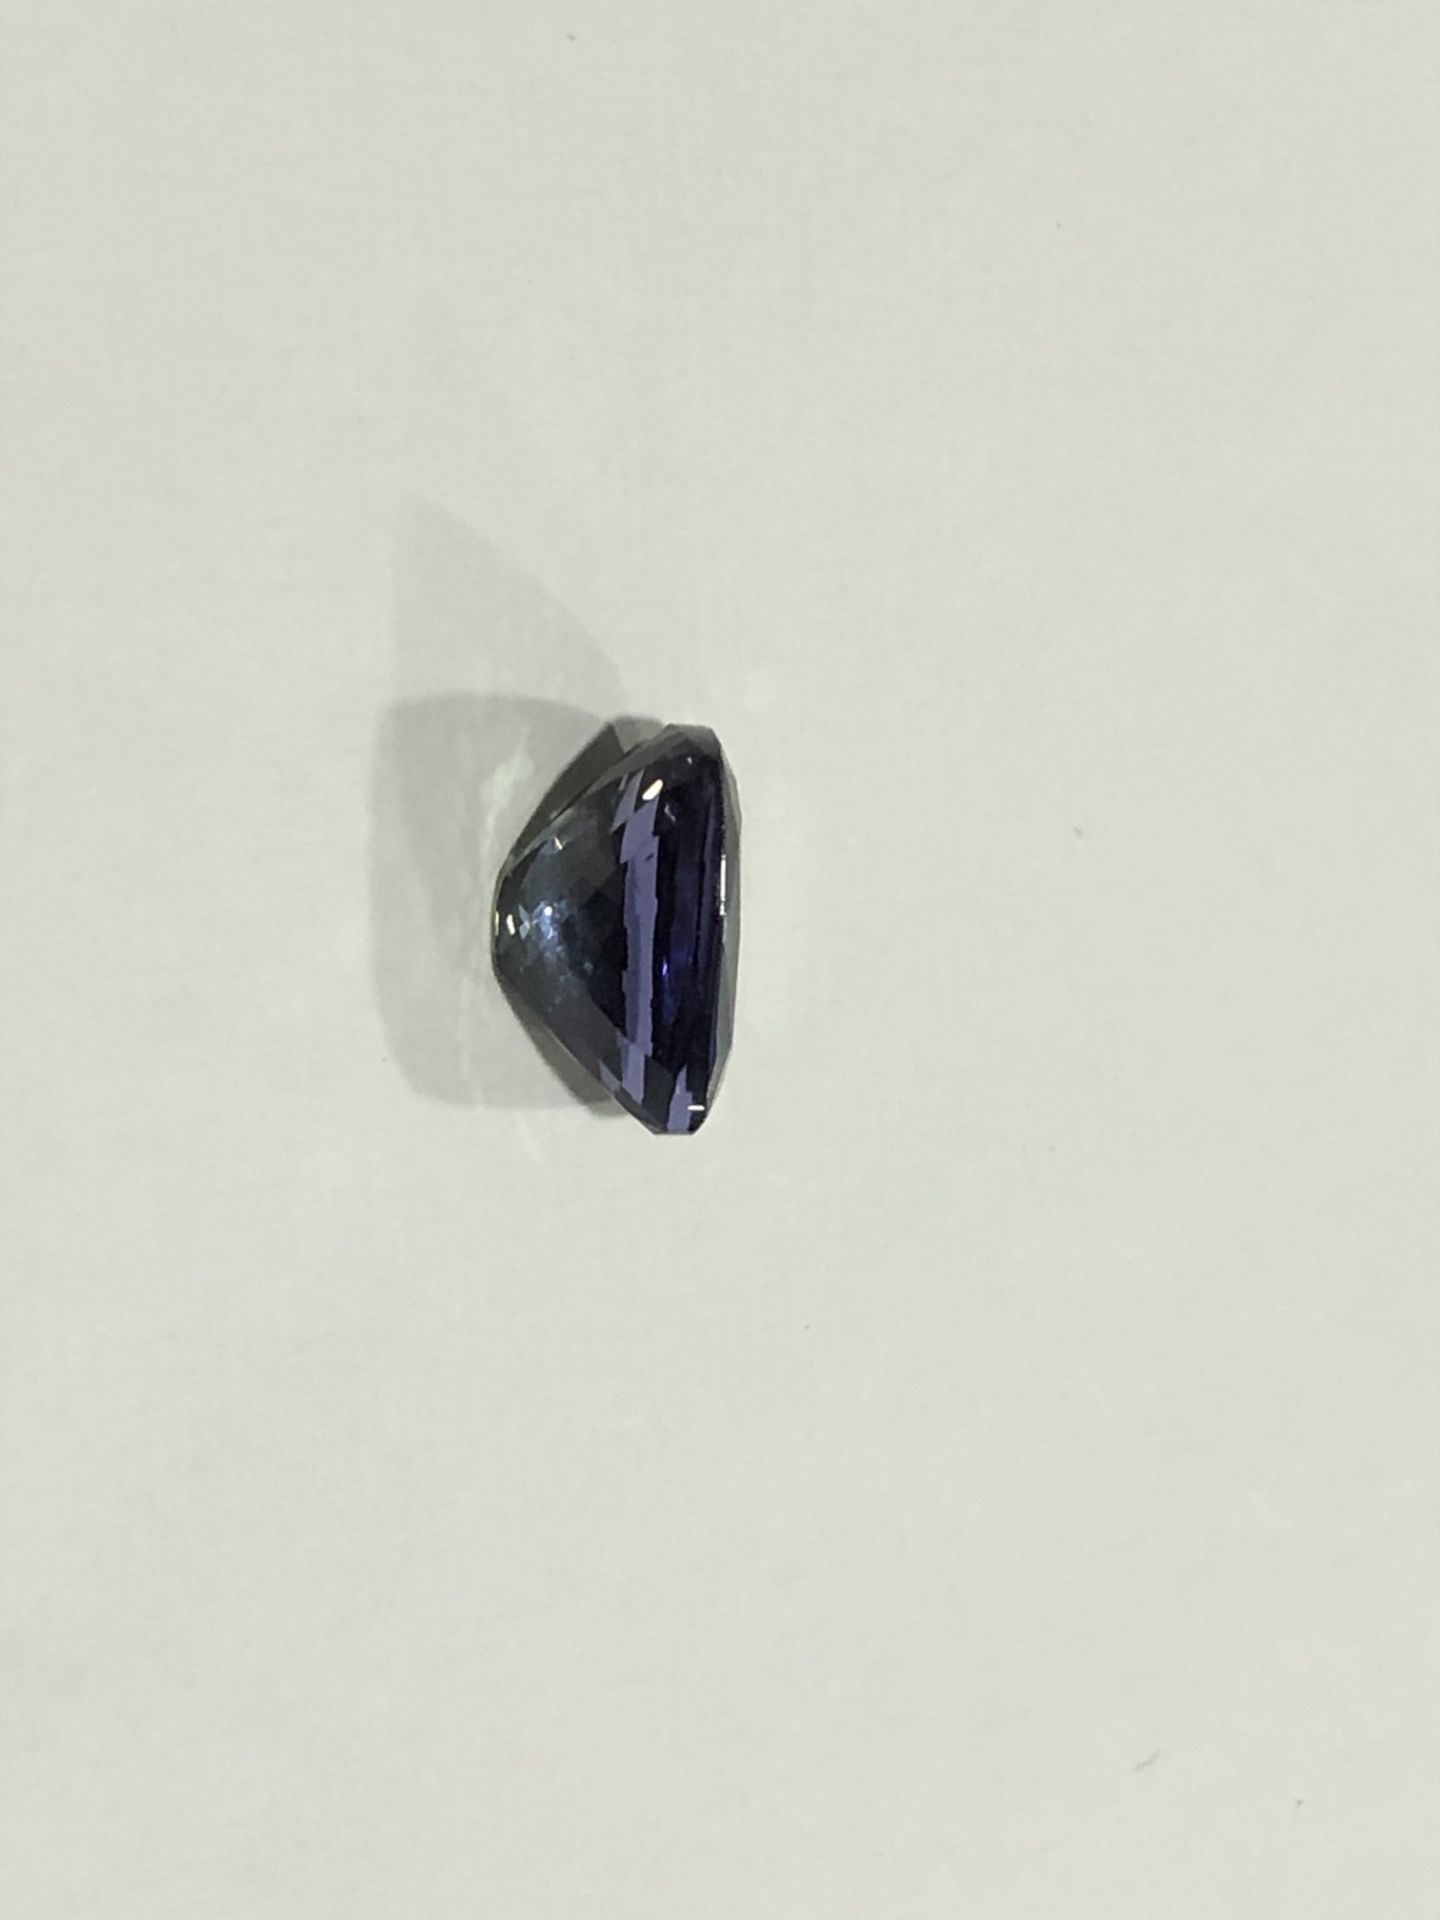 6.61ct Natural Tanzanite with GIA Certificate - Image 8 of 8